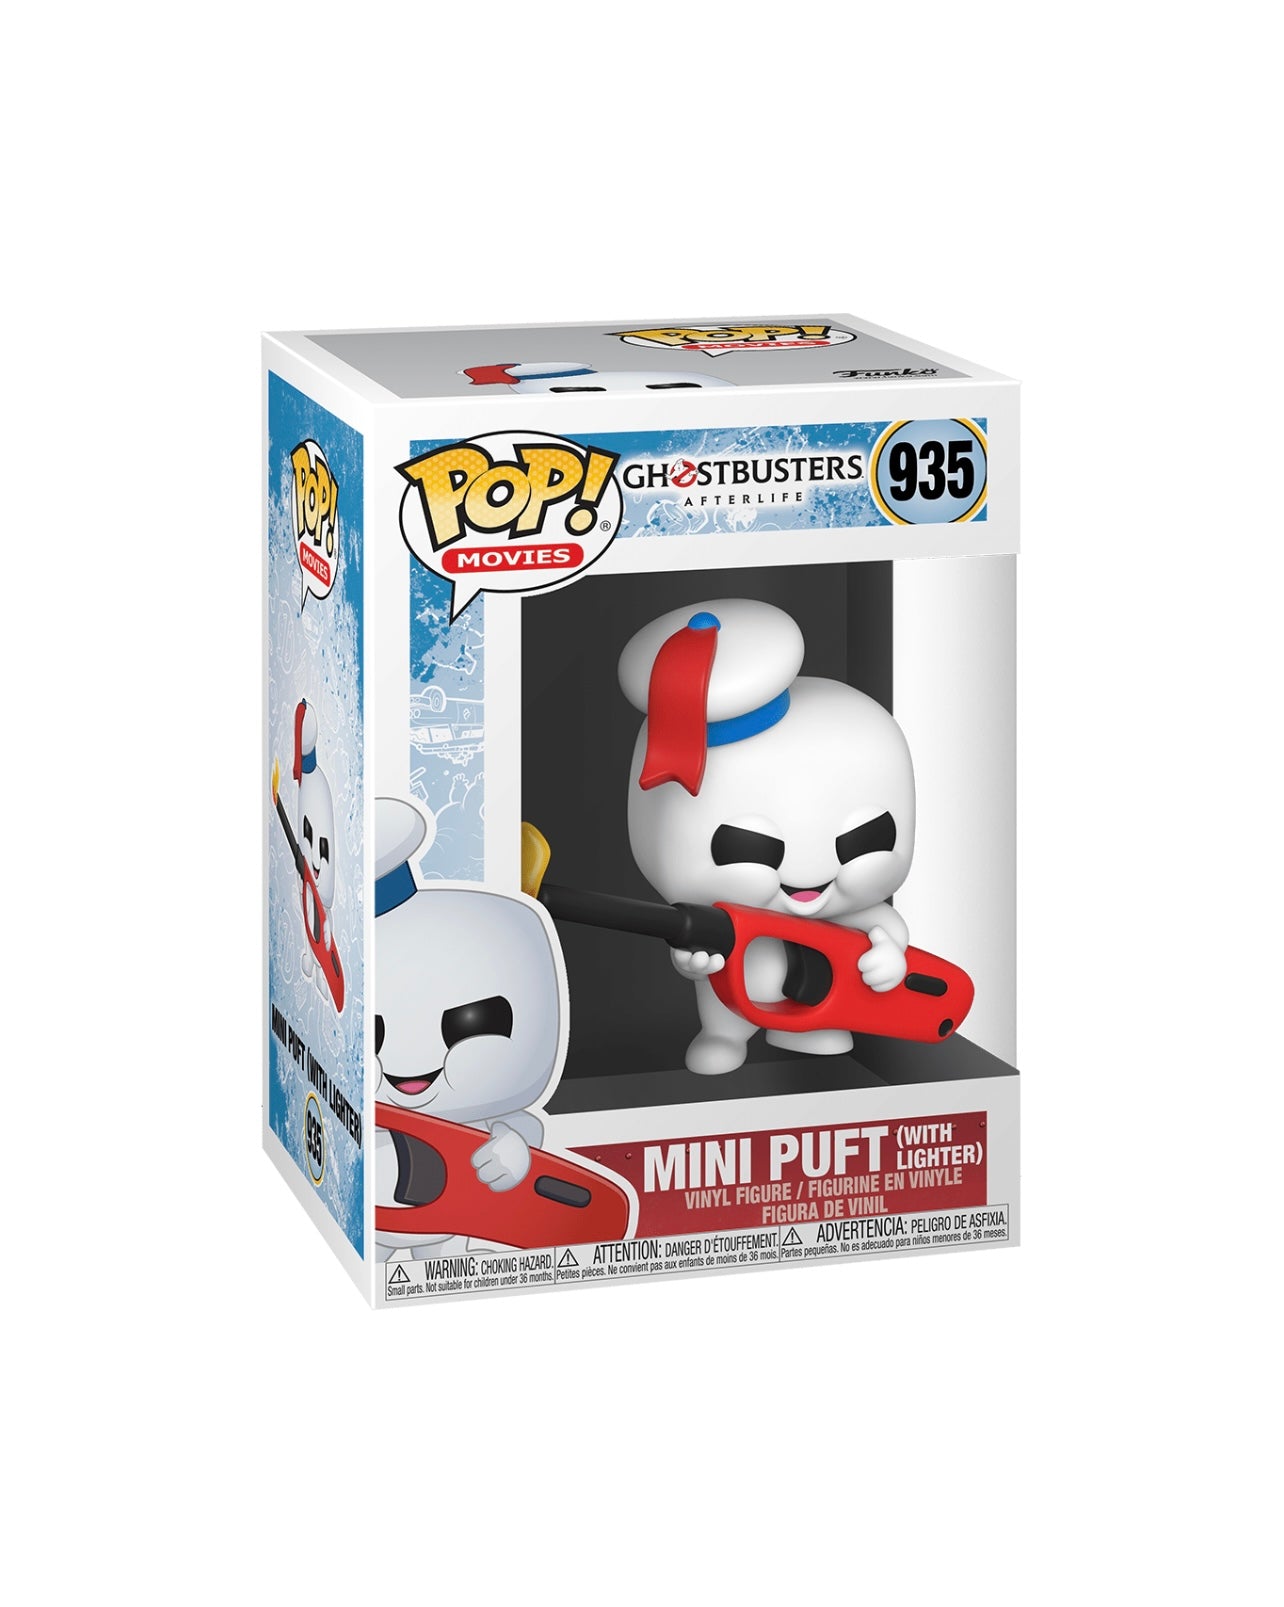 POP! Movies Ghostbusters Mini Puft w/Lighter #935